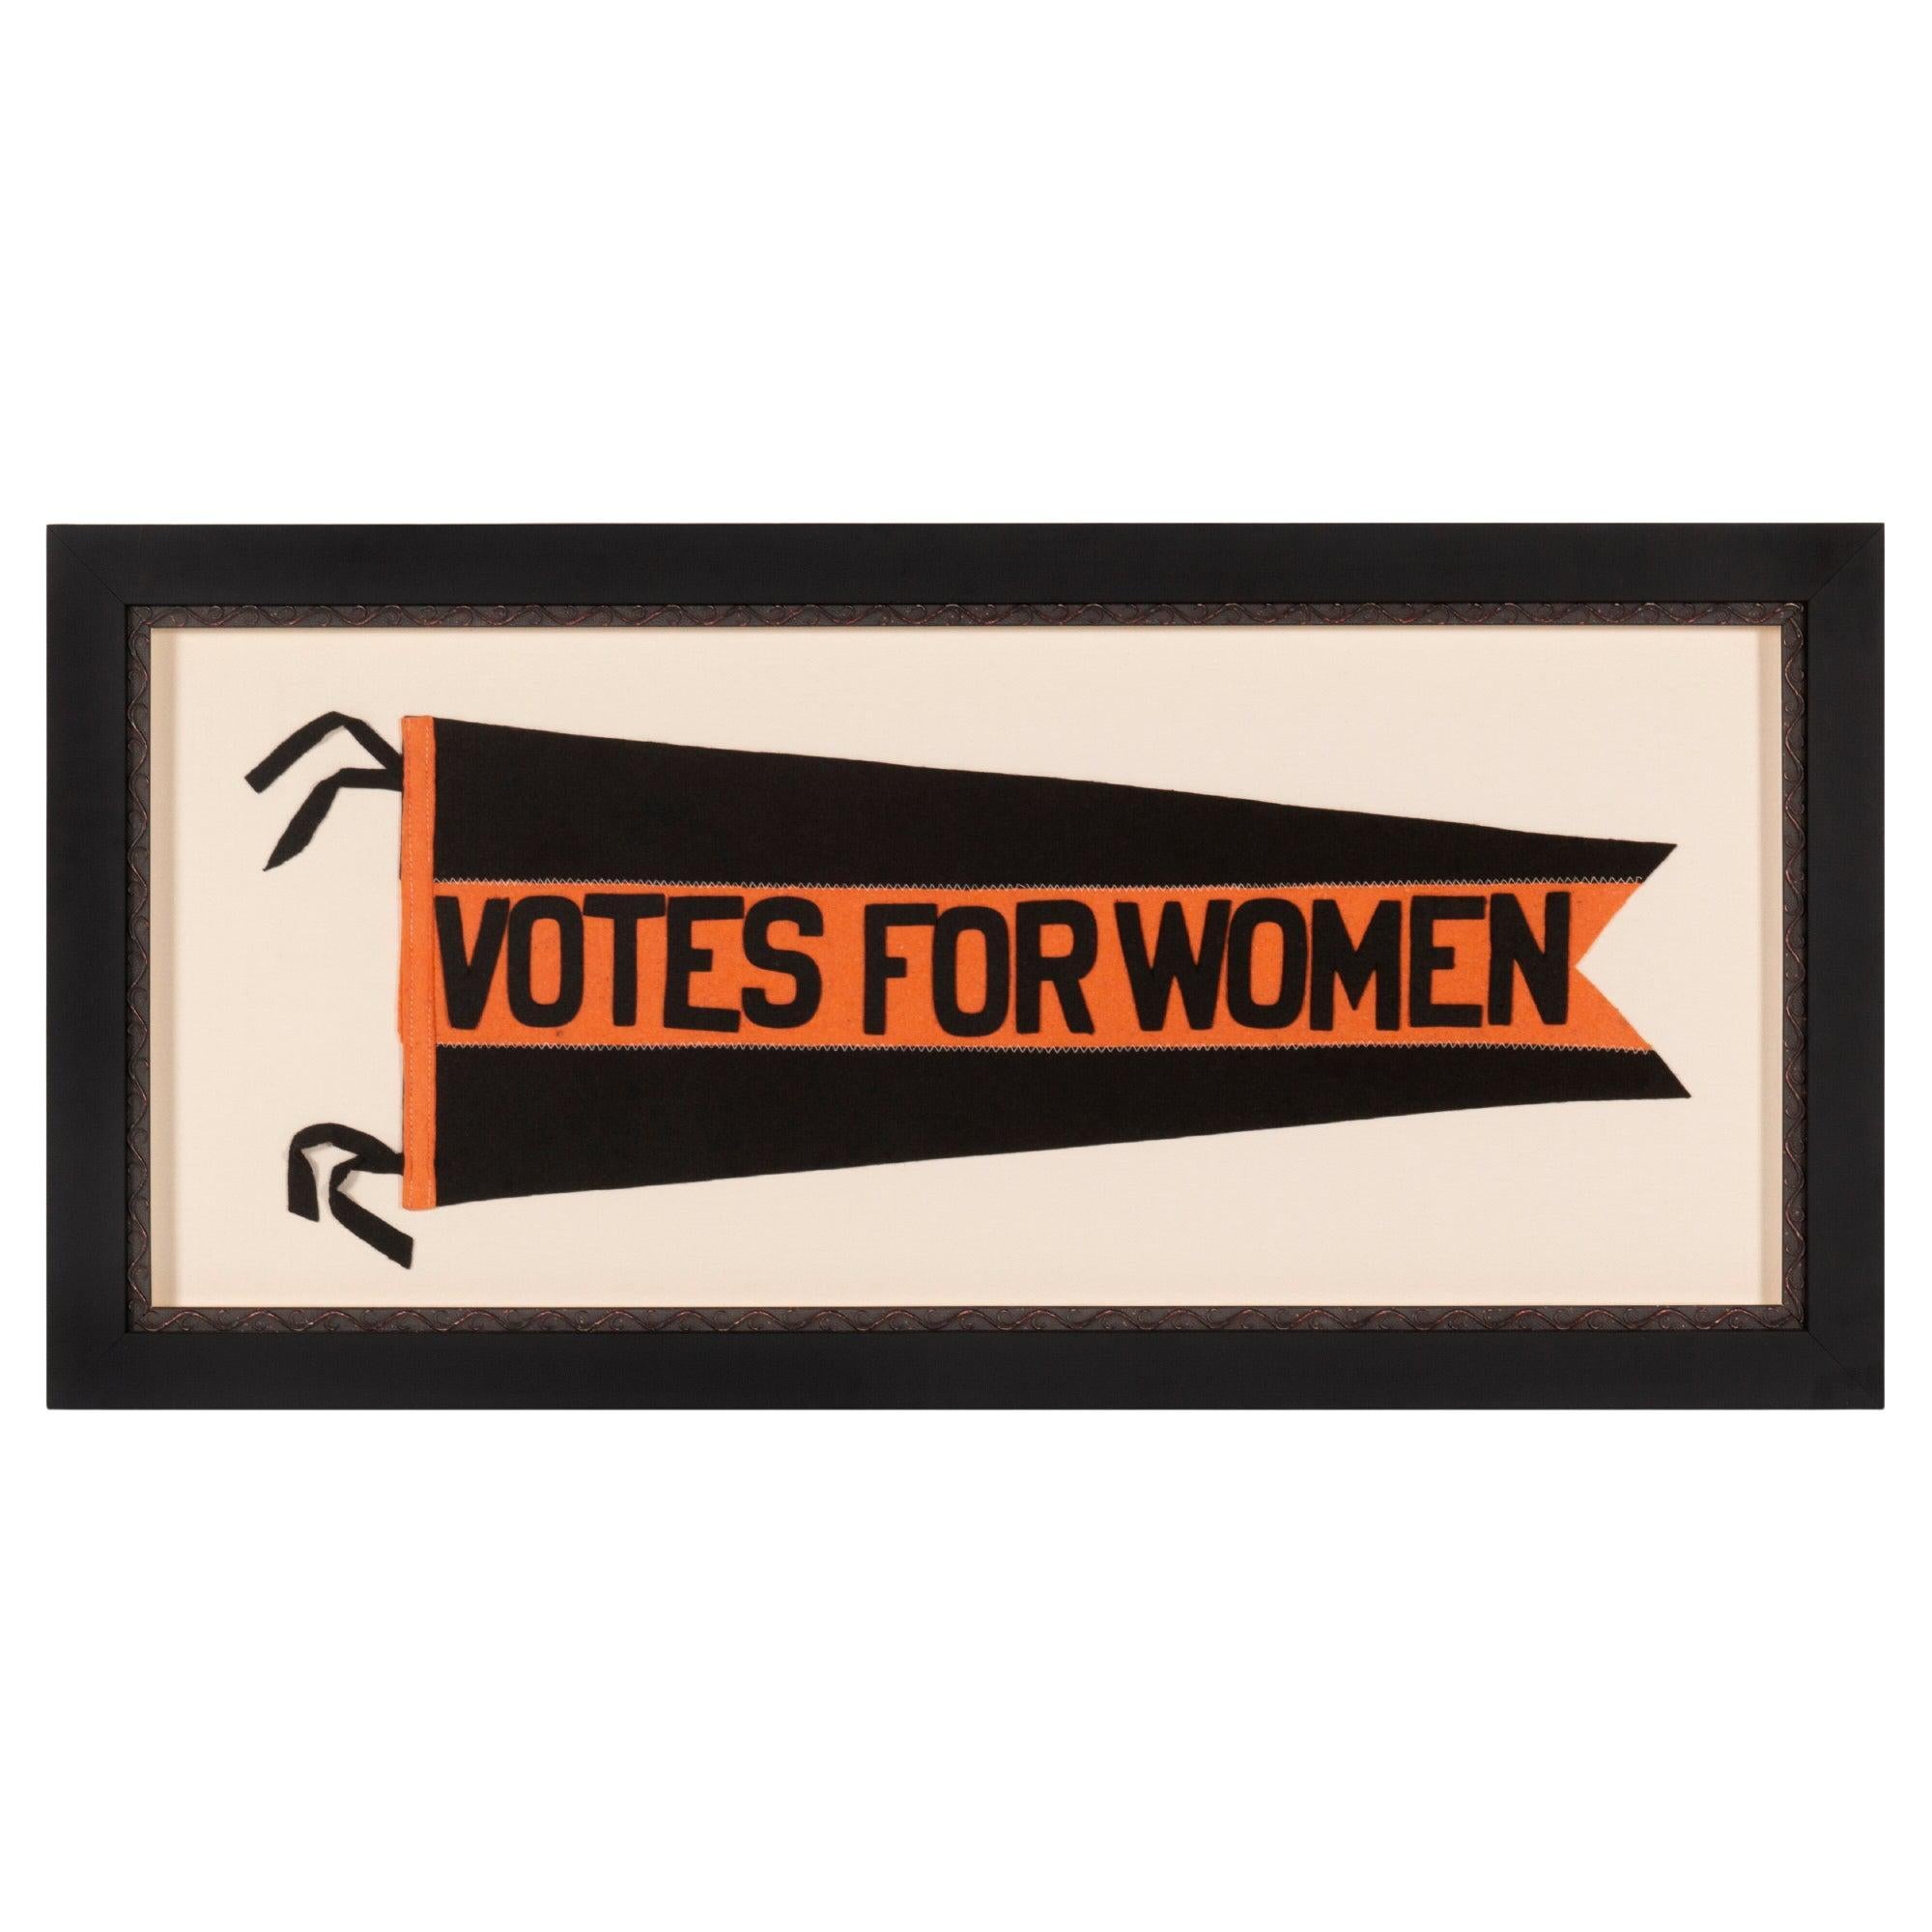 Swallowed Tailed, Suffragette Pennant in Black and Orange, ca 1912-1920